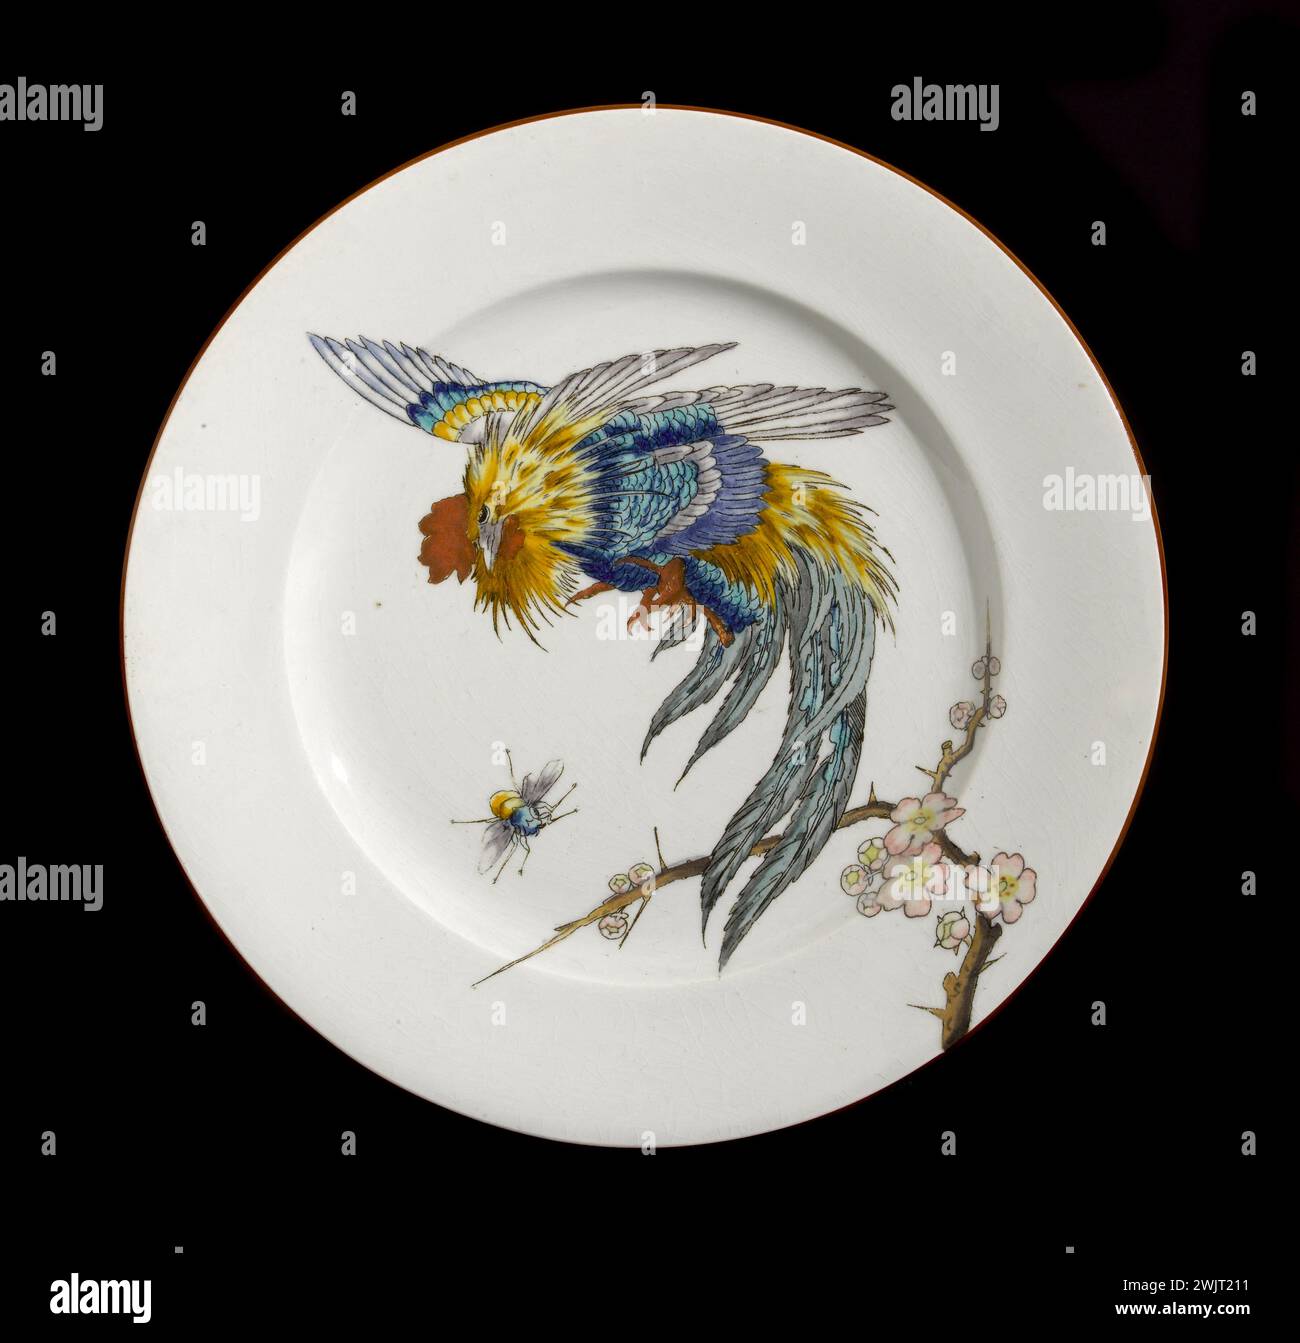 Plate. Earthenware. JULES Old and Cie Manufacture. 2nd half of the 19th century. Museum of Fine Arts of the City of Paris, Petit Palais. PLATE Crockery, Earthenware, Faience, Insect, Insect, Jules Vie Mois and Cie Manufacture, Bird, Crockery, Putch, Bird, Stock Photo